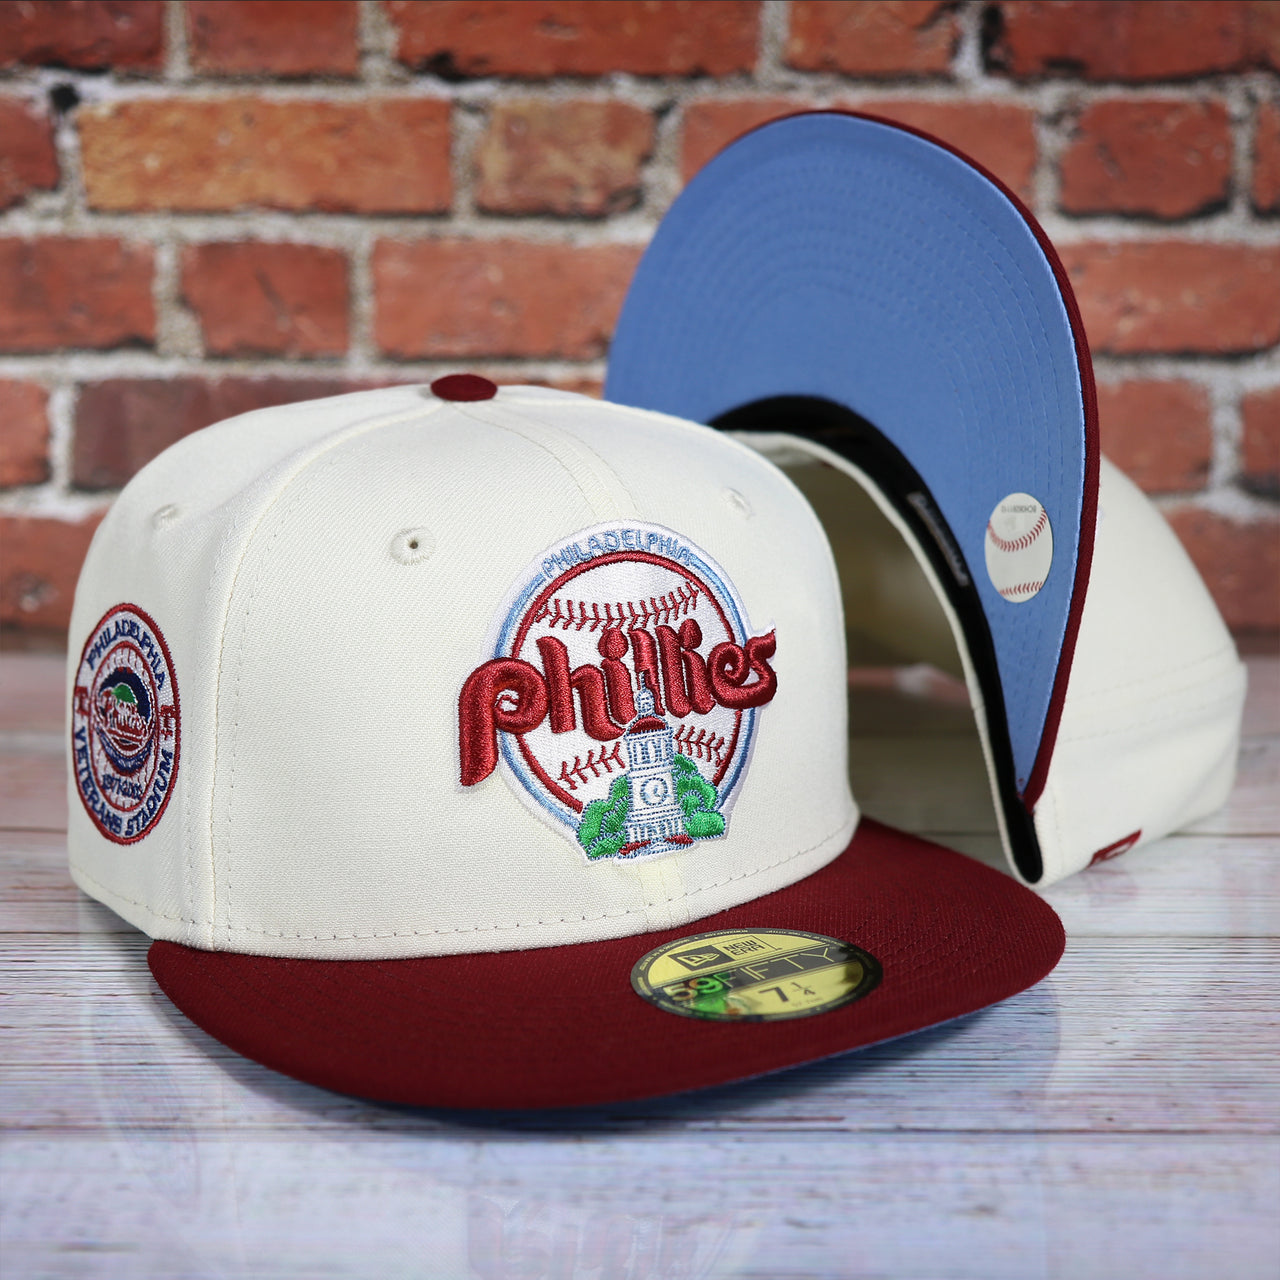 Philadelphia Phillies Cooperstown City Hall Logo Veterans Stadium Side Patch Powder Blue UV 59Fifty Fitted Cap | Chrome/Maroon Cap Swag Exclusive